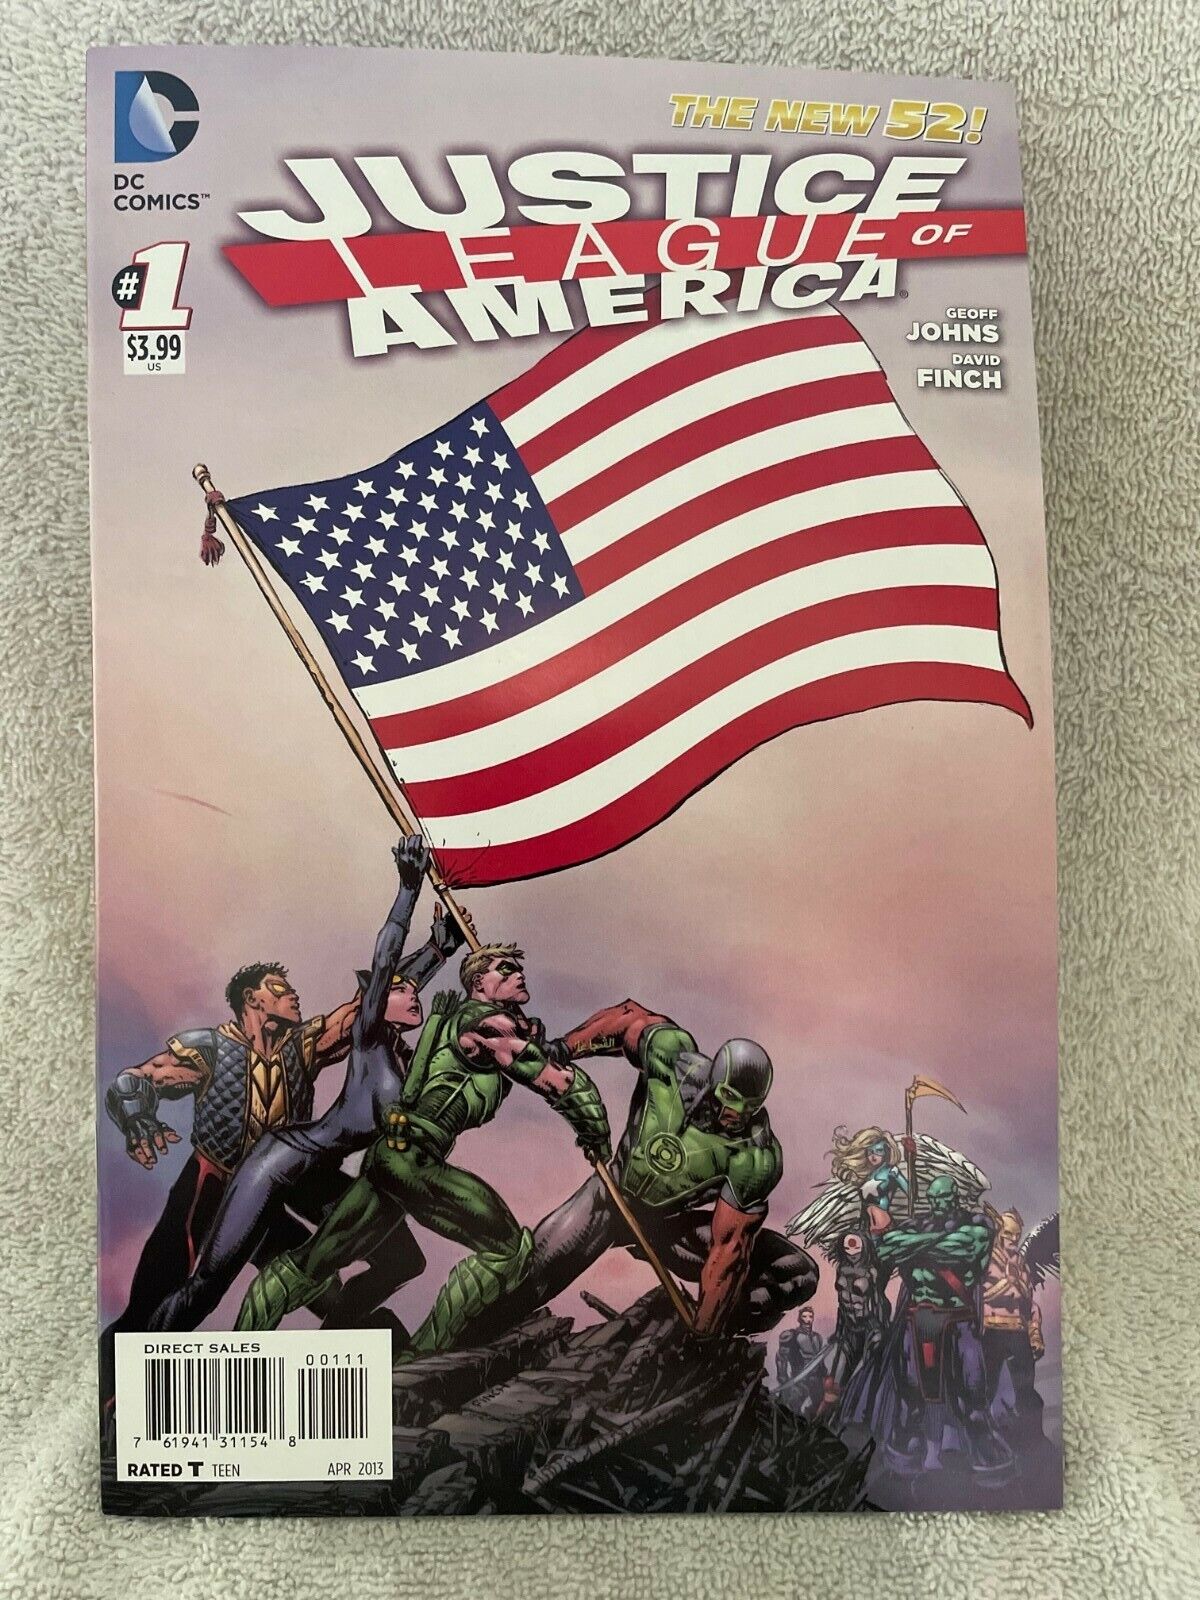 Justice League of America #1: World's Most Dangerous [The New 52] Johns, Geo